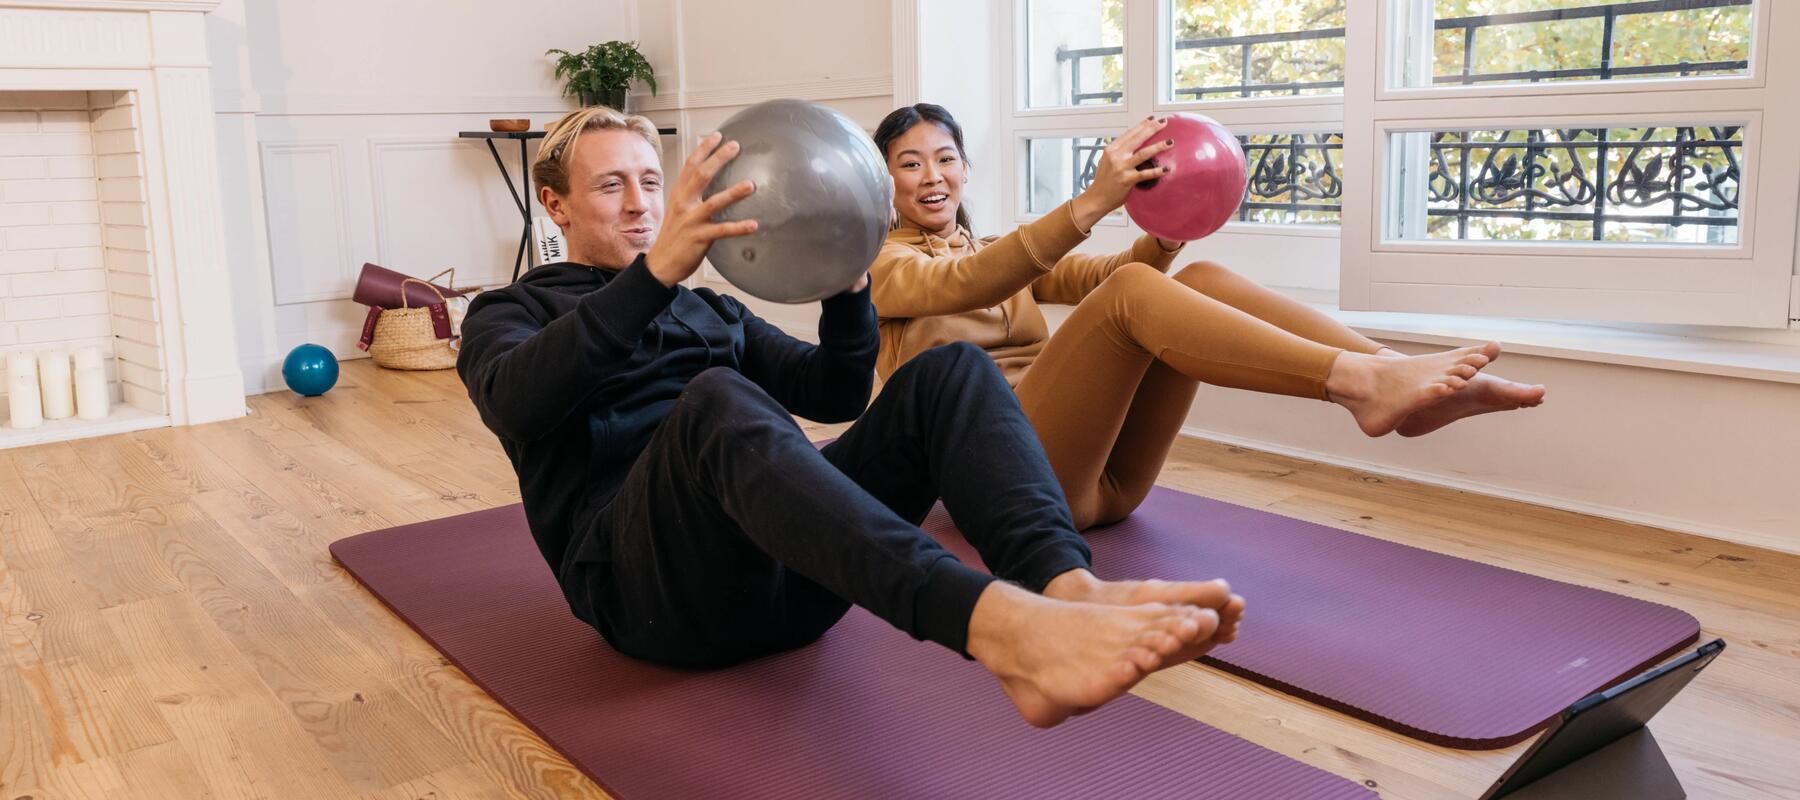 A man and women working out at home with a medicine ball